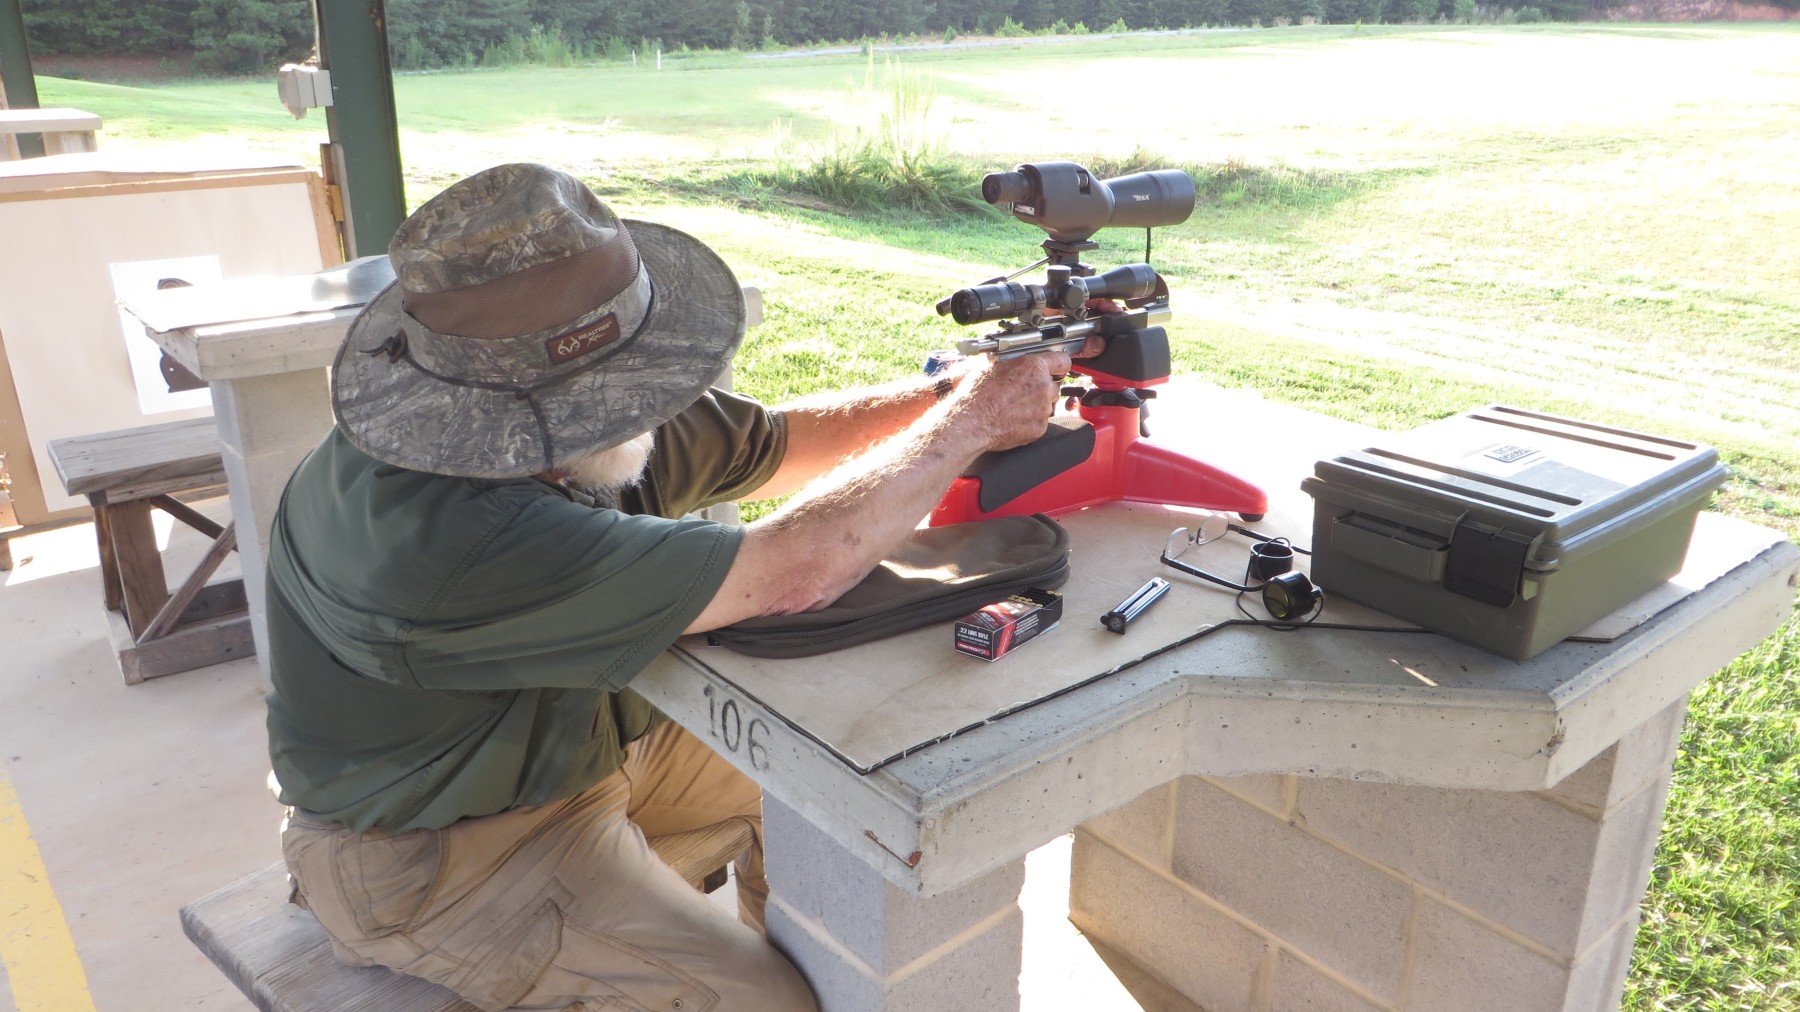 Doyle Estes shows how it's done with a Ruger MK II at 100 yards